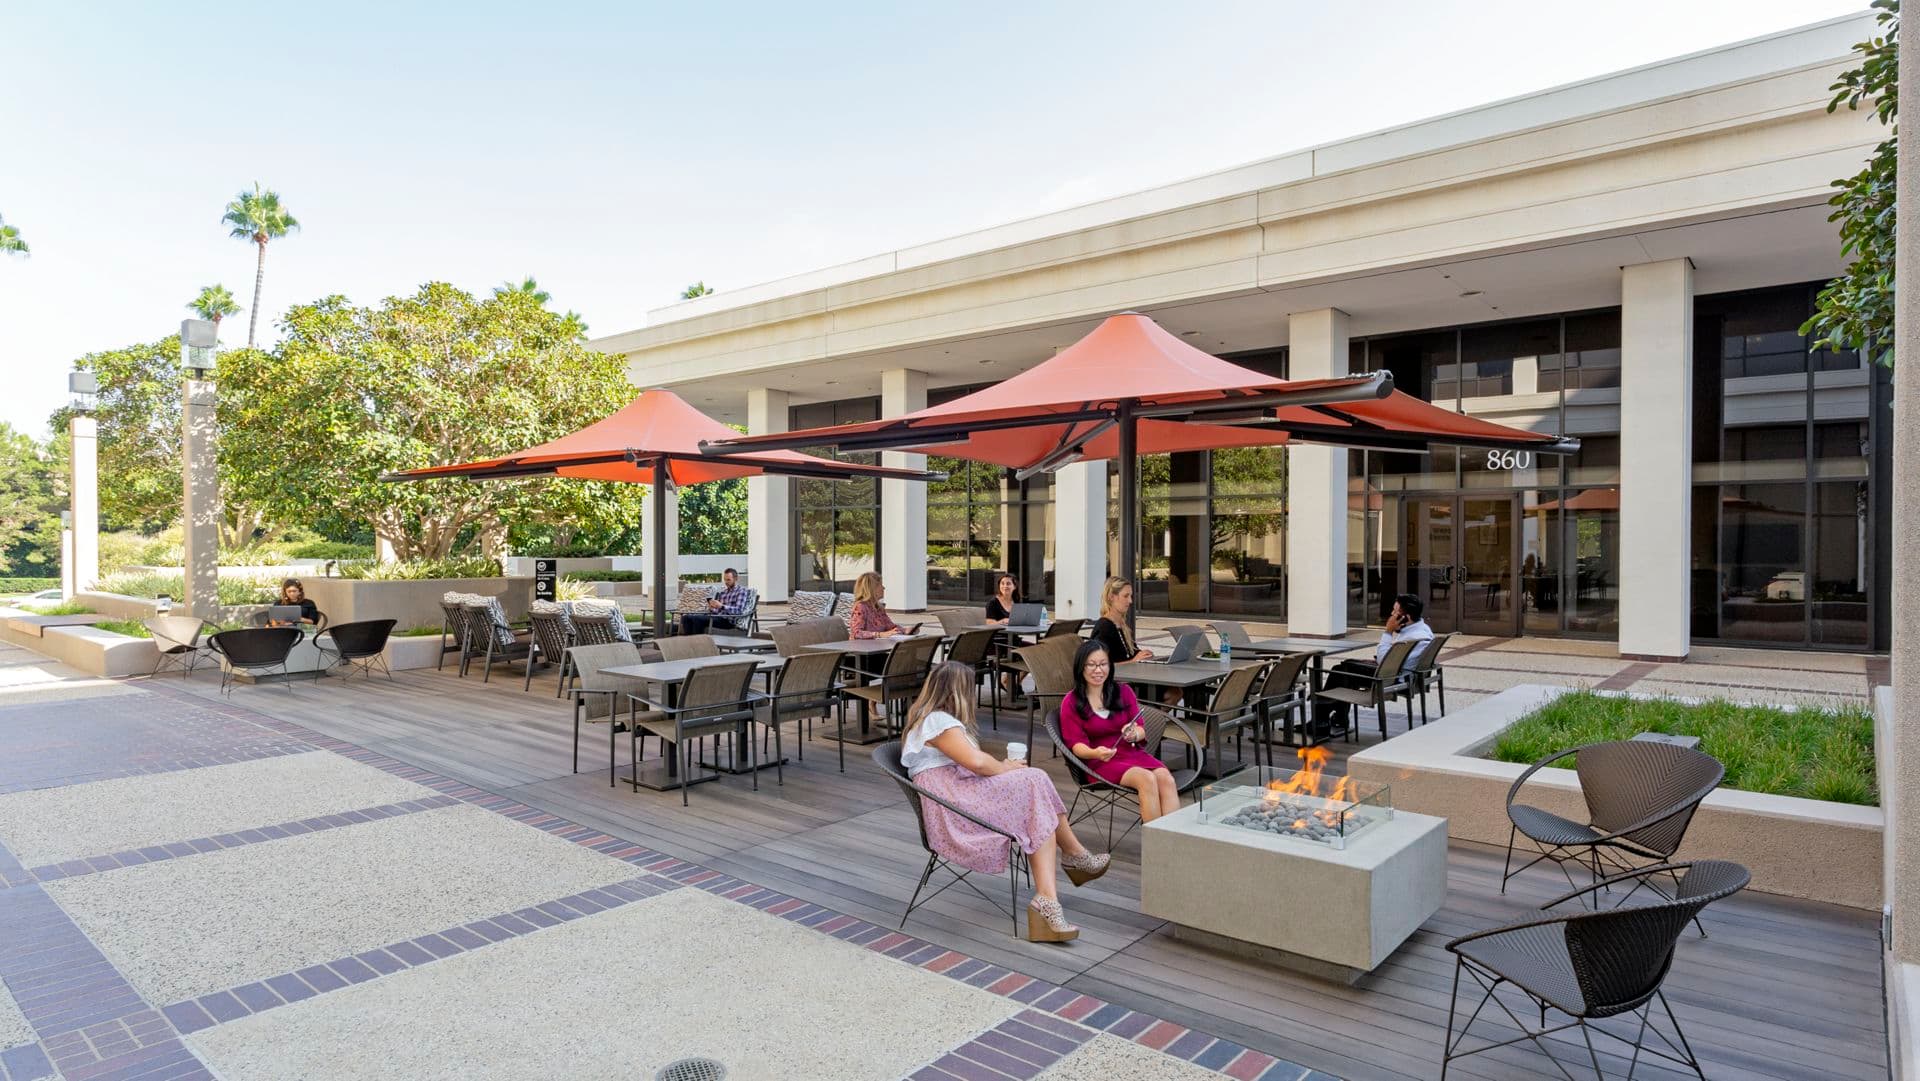 Lifestyle photography of The Commons at 800 Newport Center Drive - Pacific Financial Plaza in Newport Beach, CA